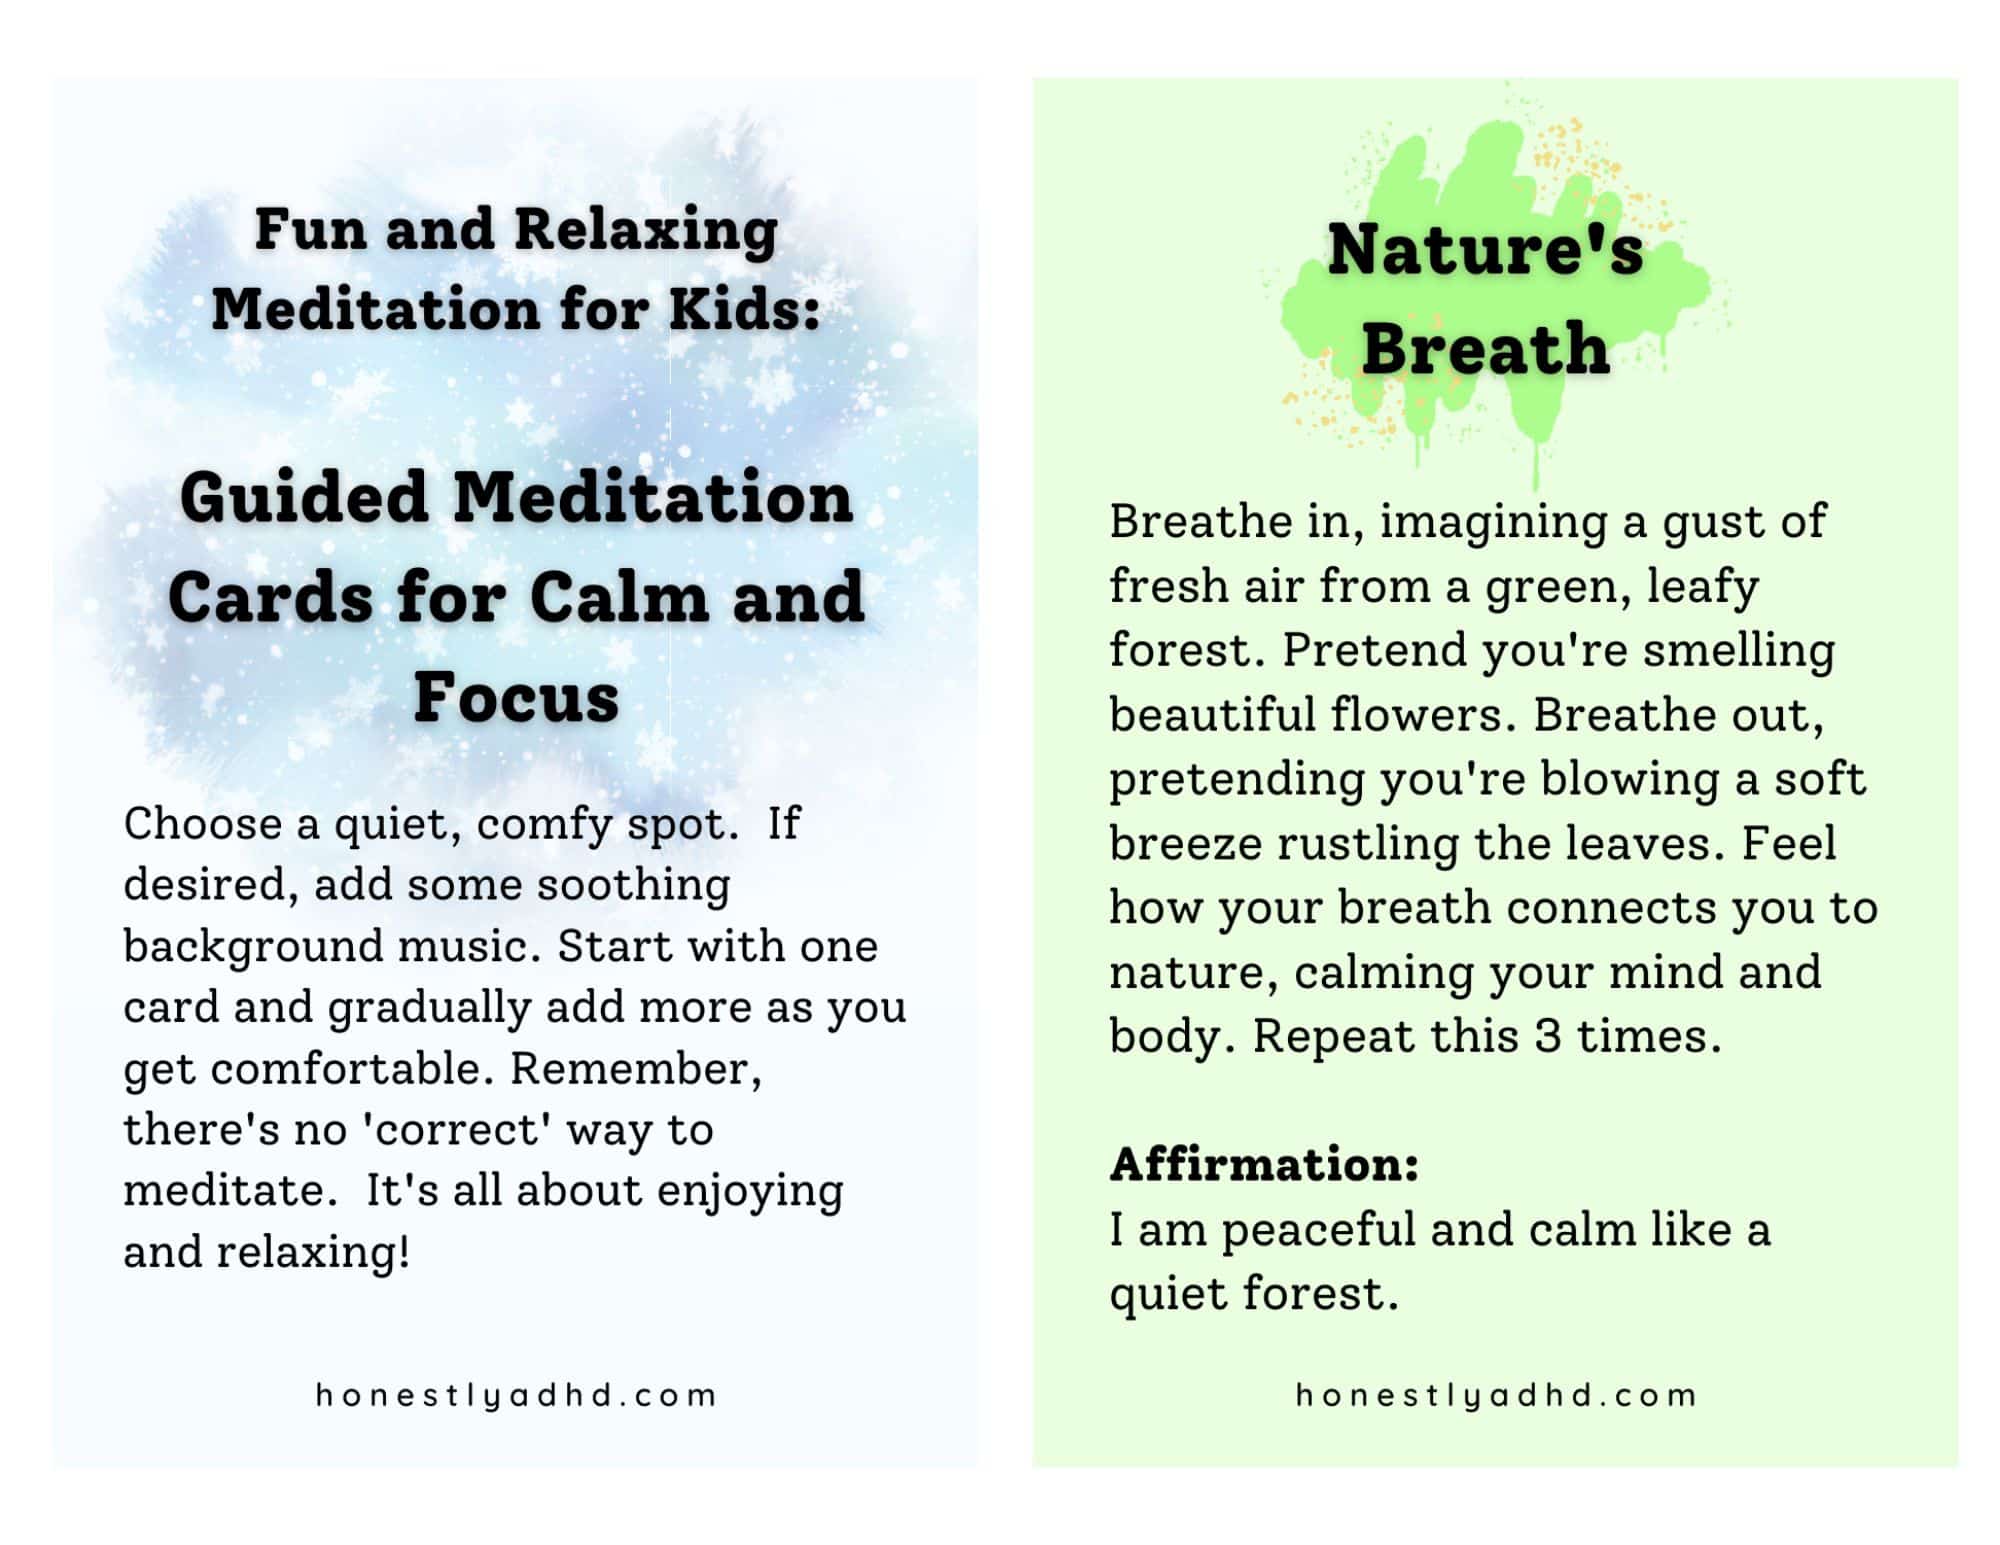 Examples of guided meditation cards for children, including the instructions and a card titled "Nature's Breath."